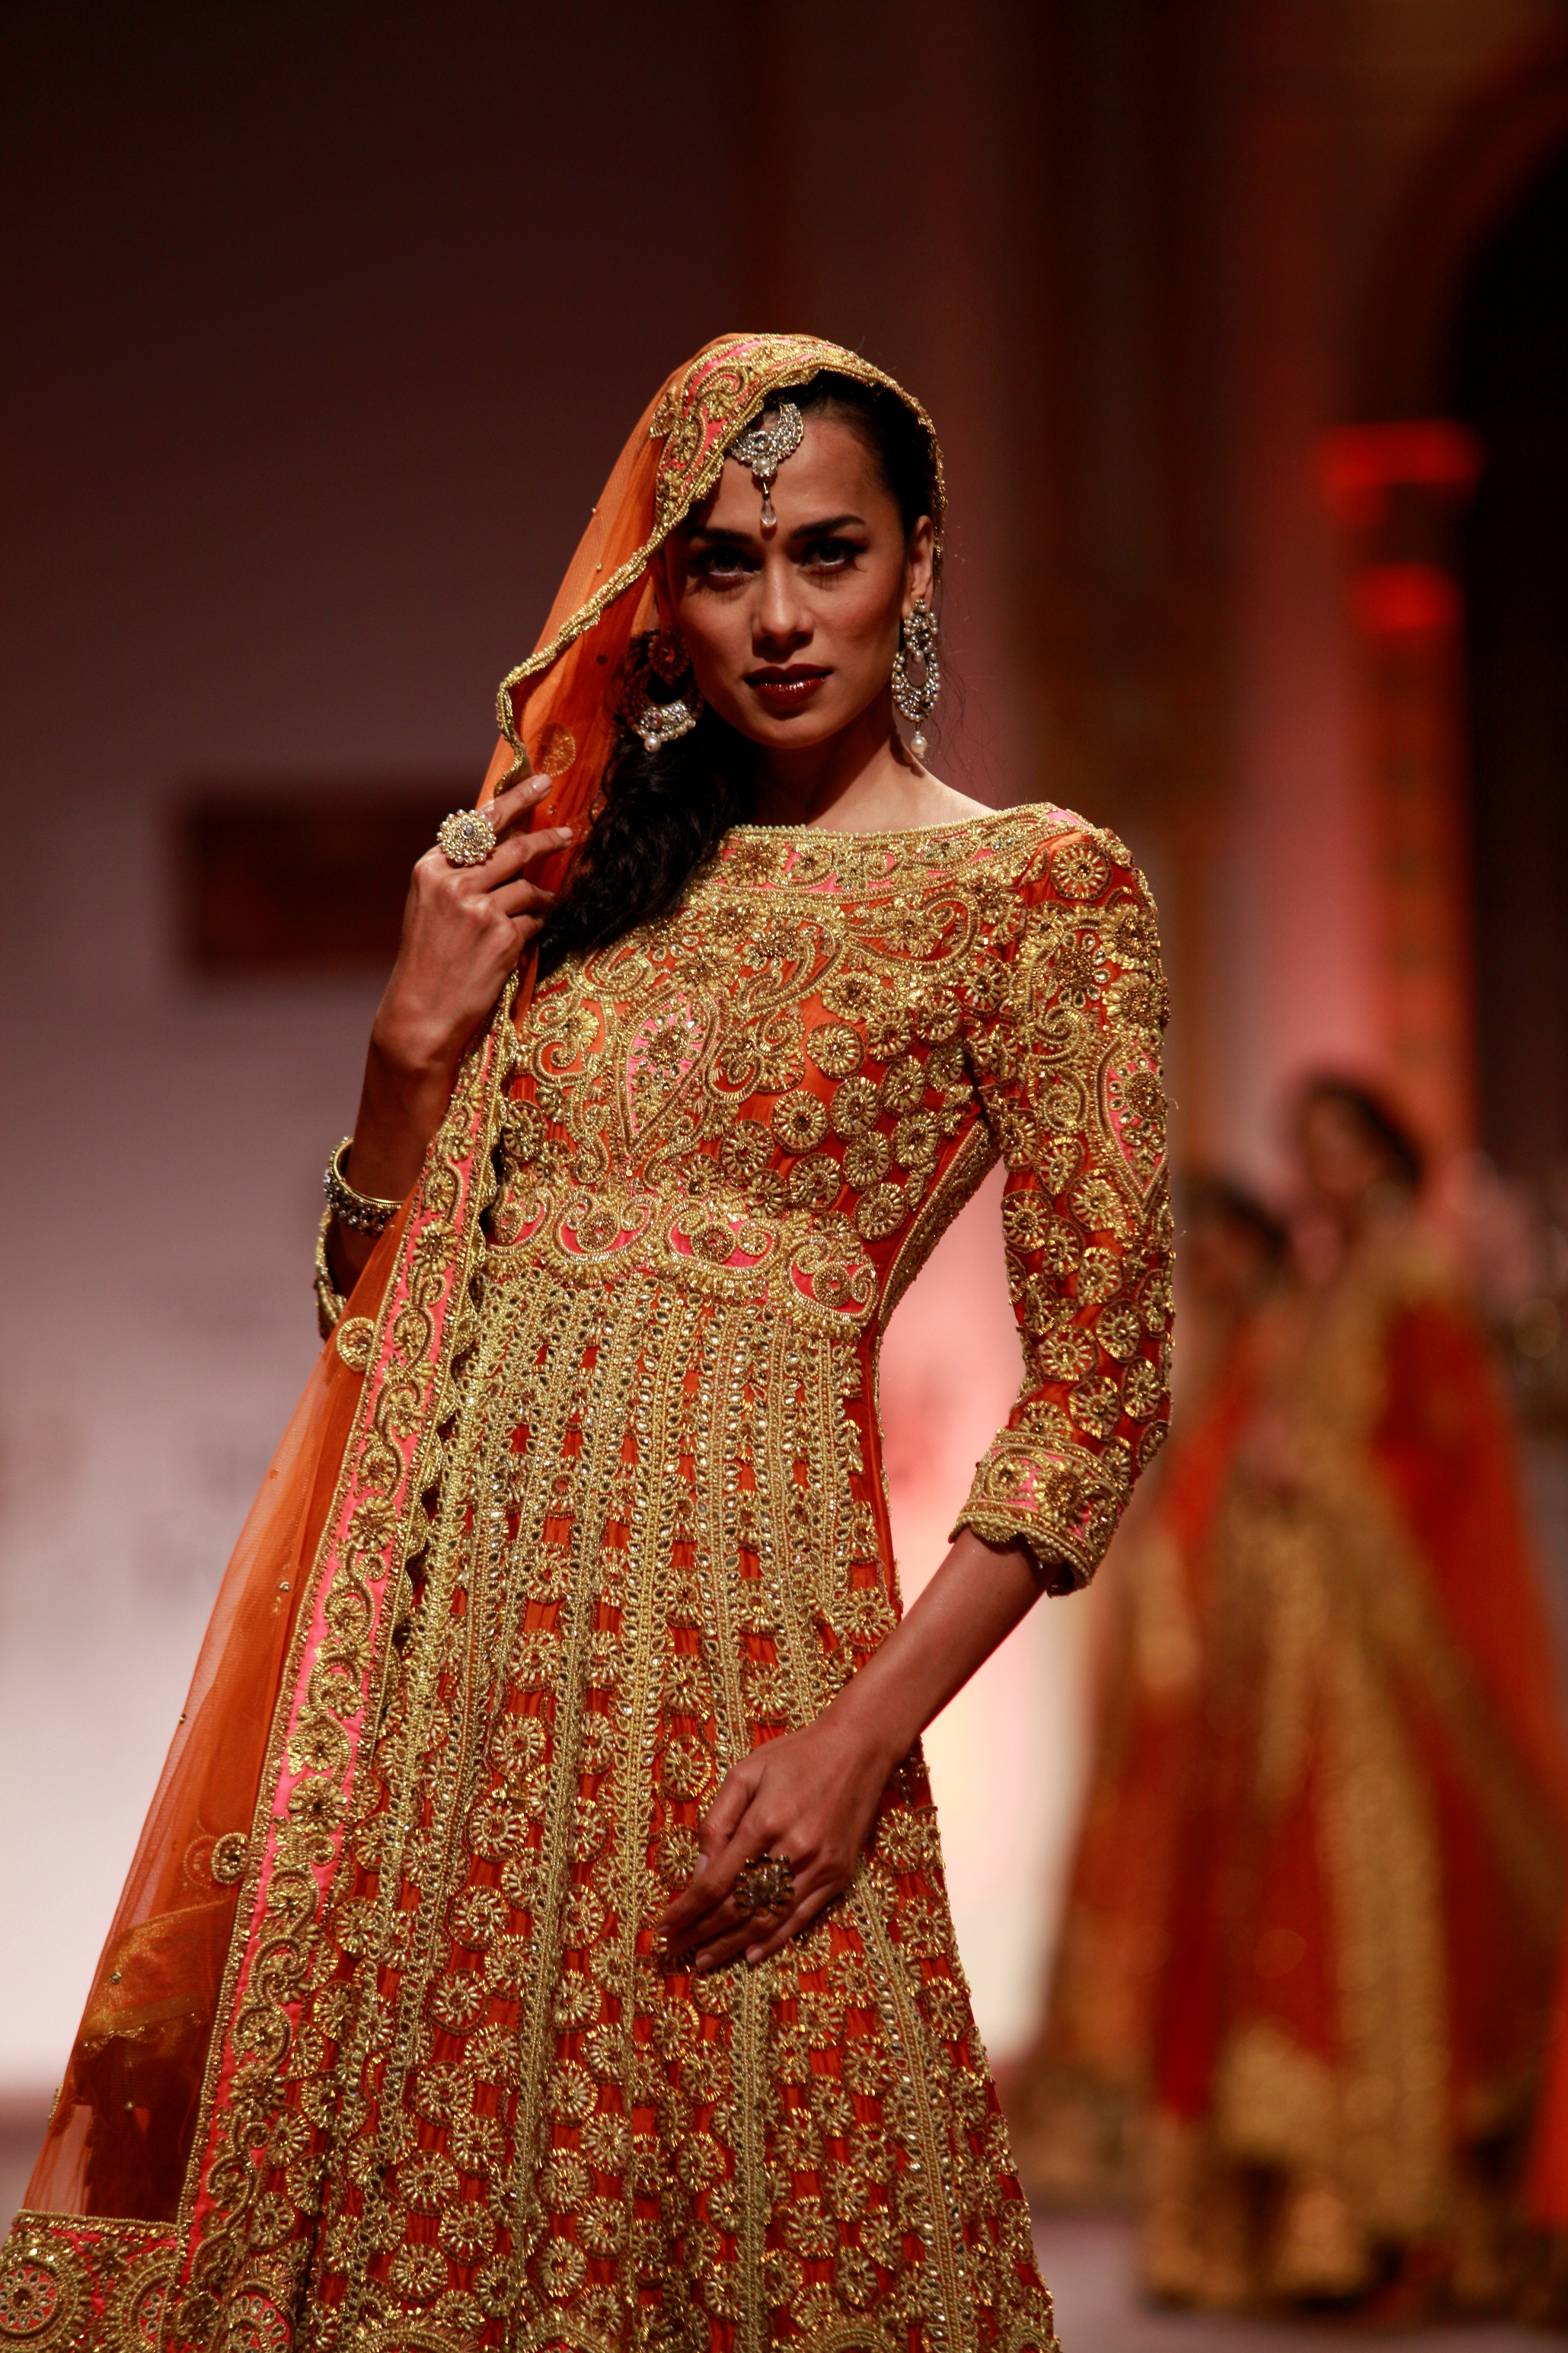 Seen at Aamby Valley India Bridal Fashion Week - Day 5- Model walking for Preeti S Kapoor